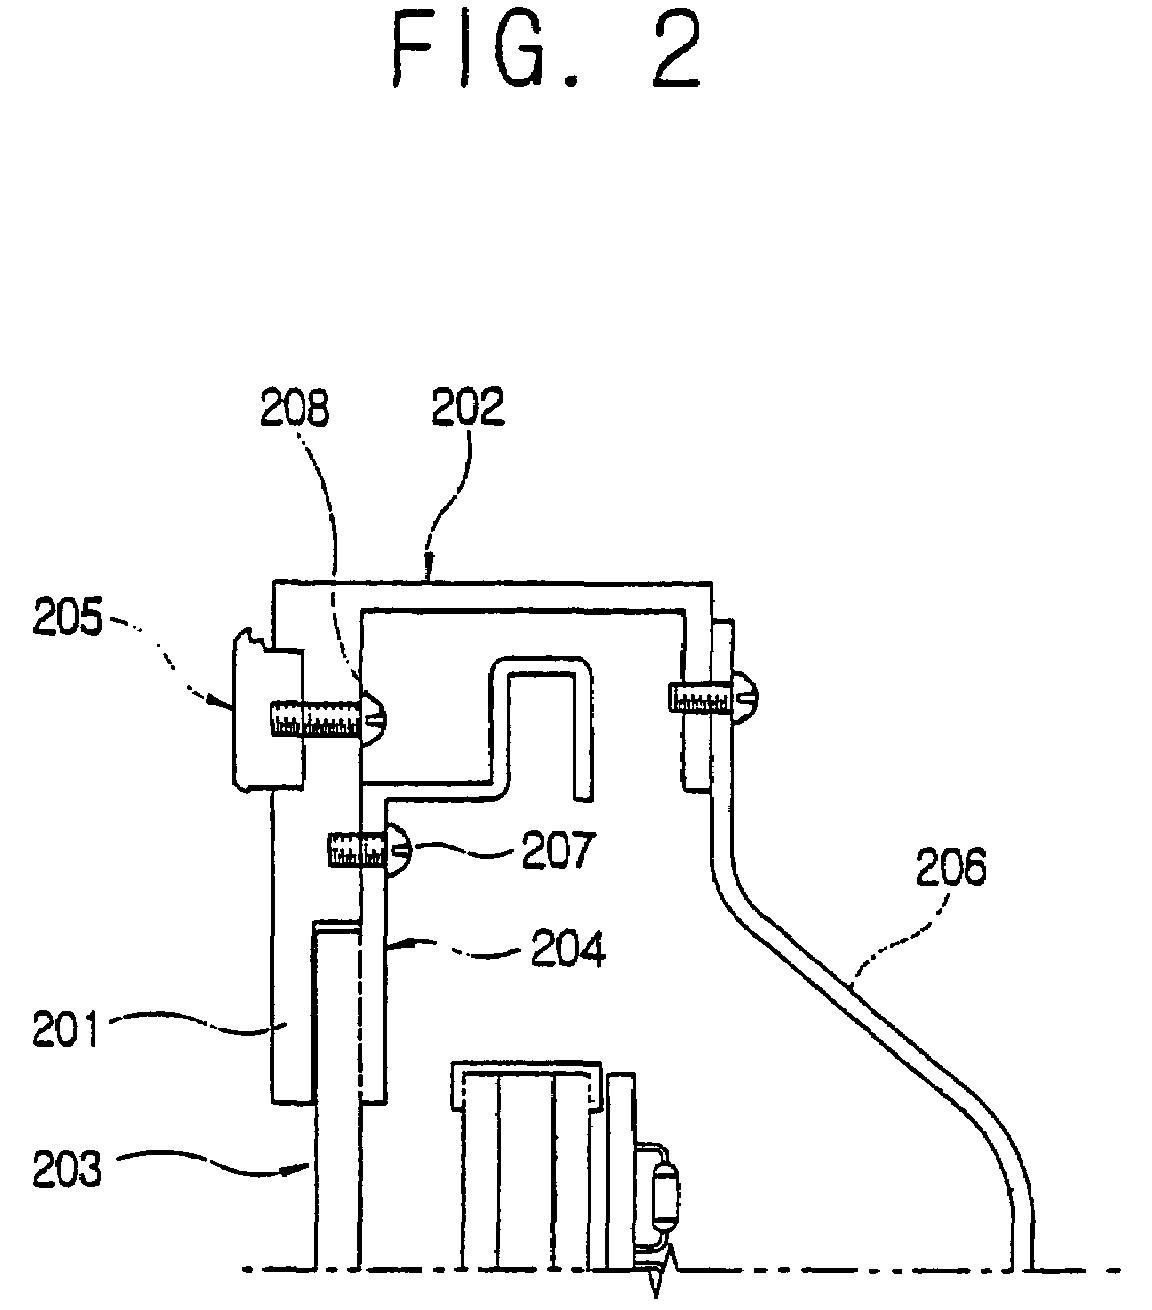 Display apparatus and method